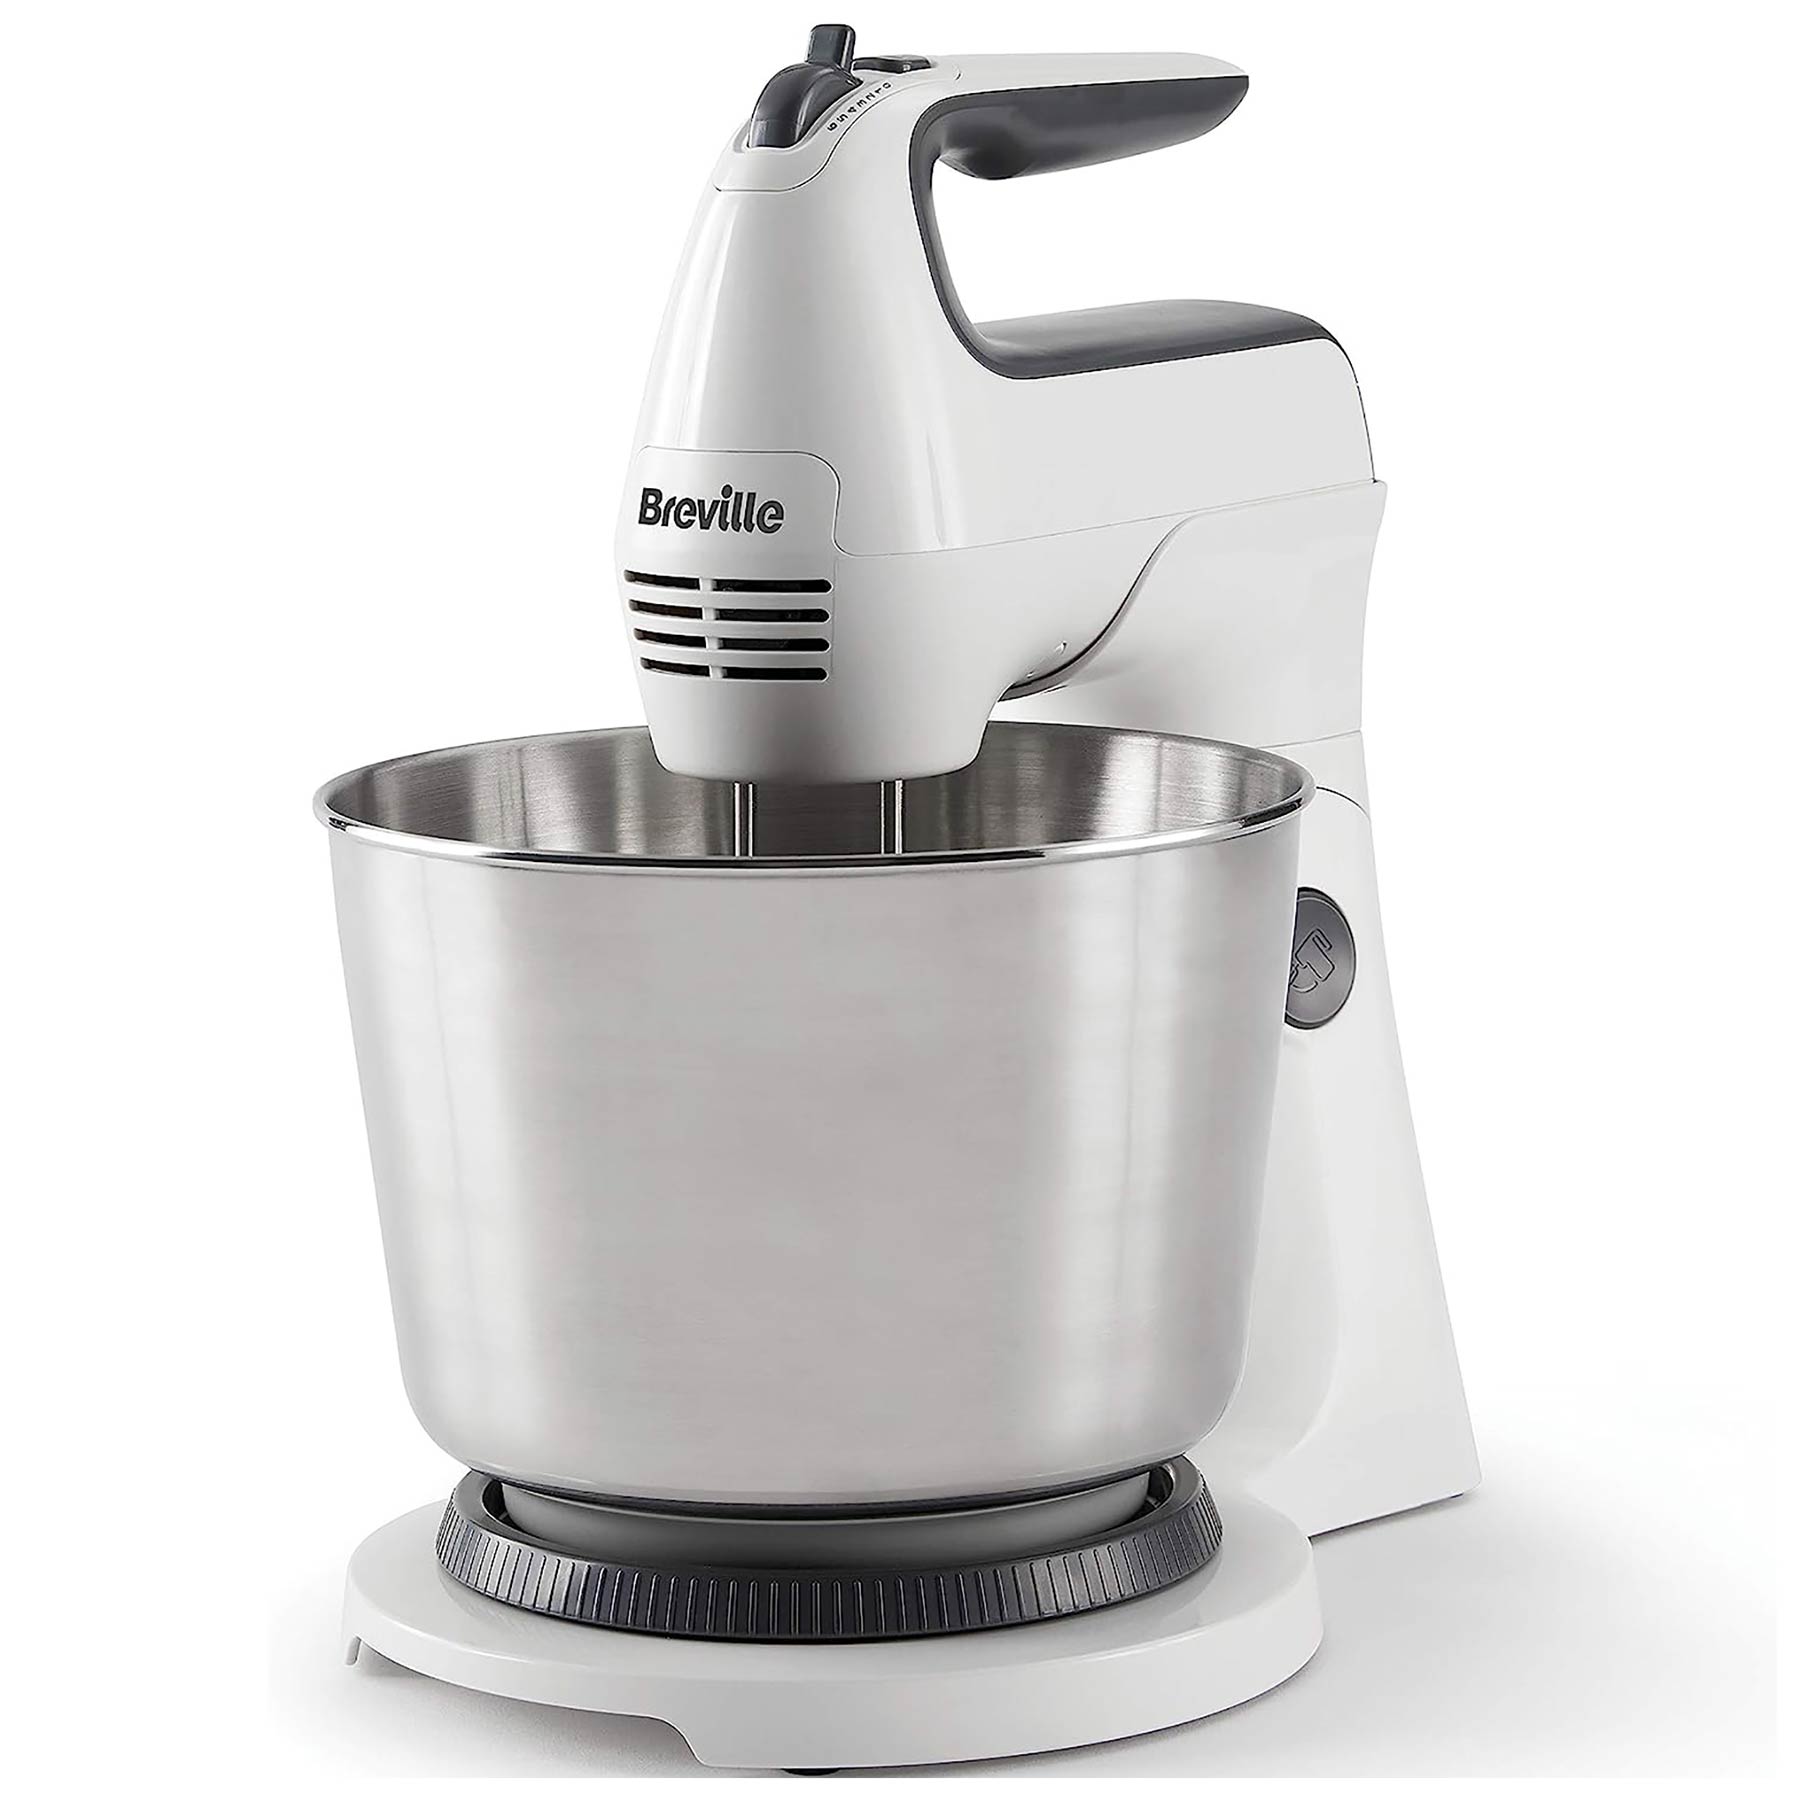 Image of Breville VFM031 Classic Combo Hand Stand Mixer